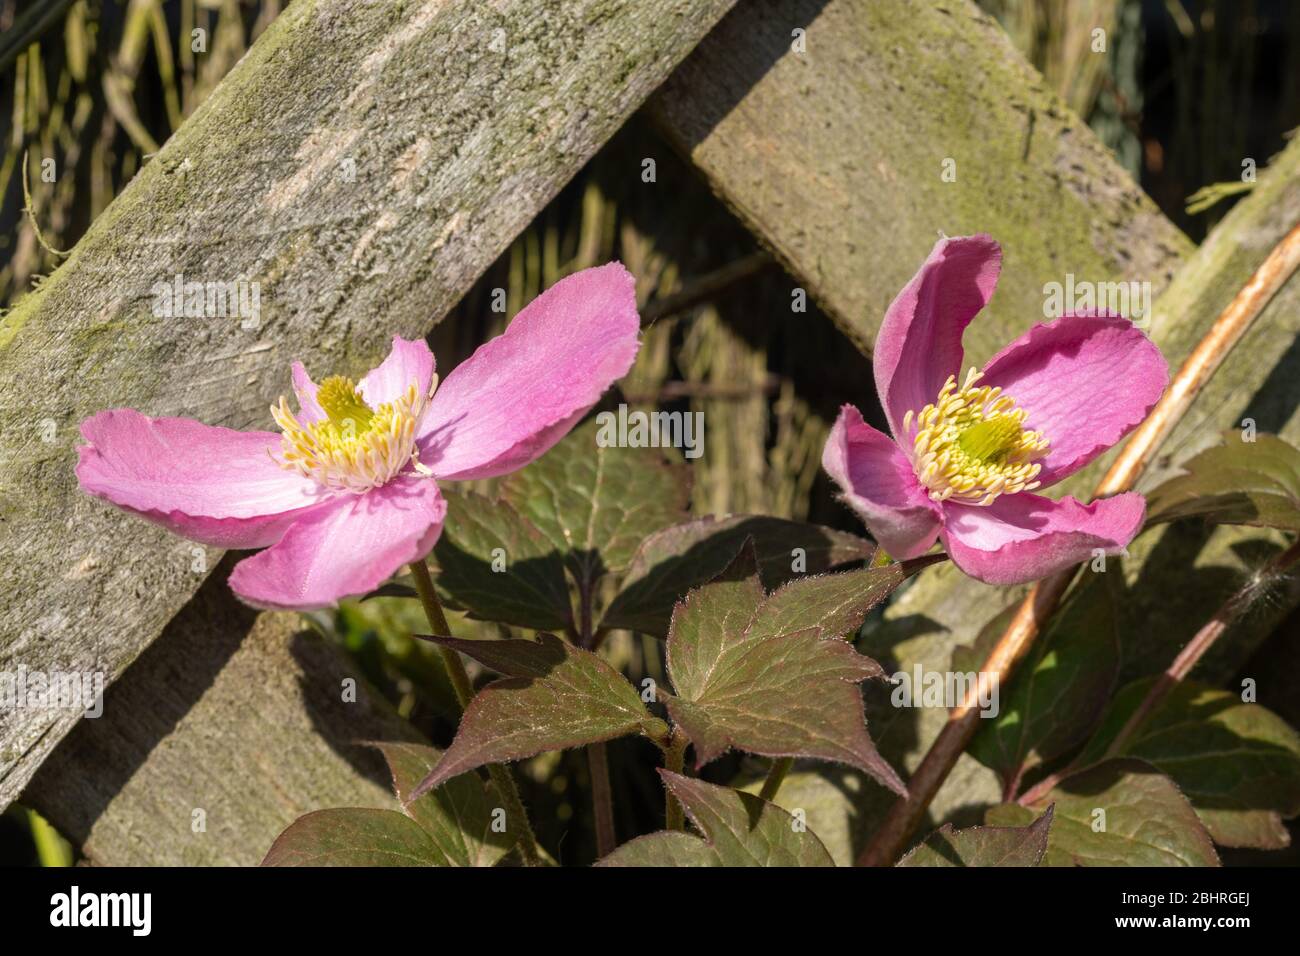 Clematis montana with pretty pink flowers growing up a trellis during April, late Spring, UK, also called mountain clematis or Himalayan clematis Stock Photo